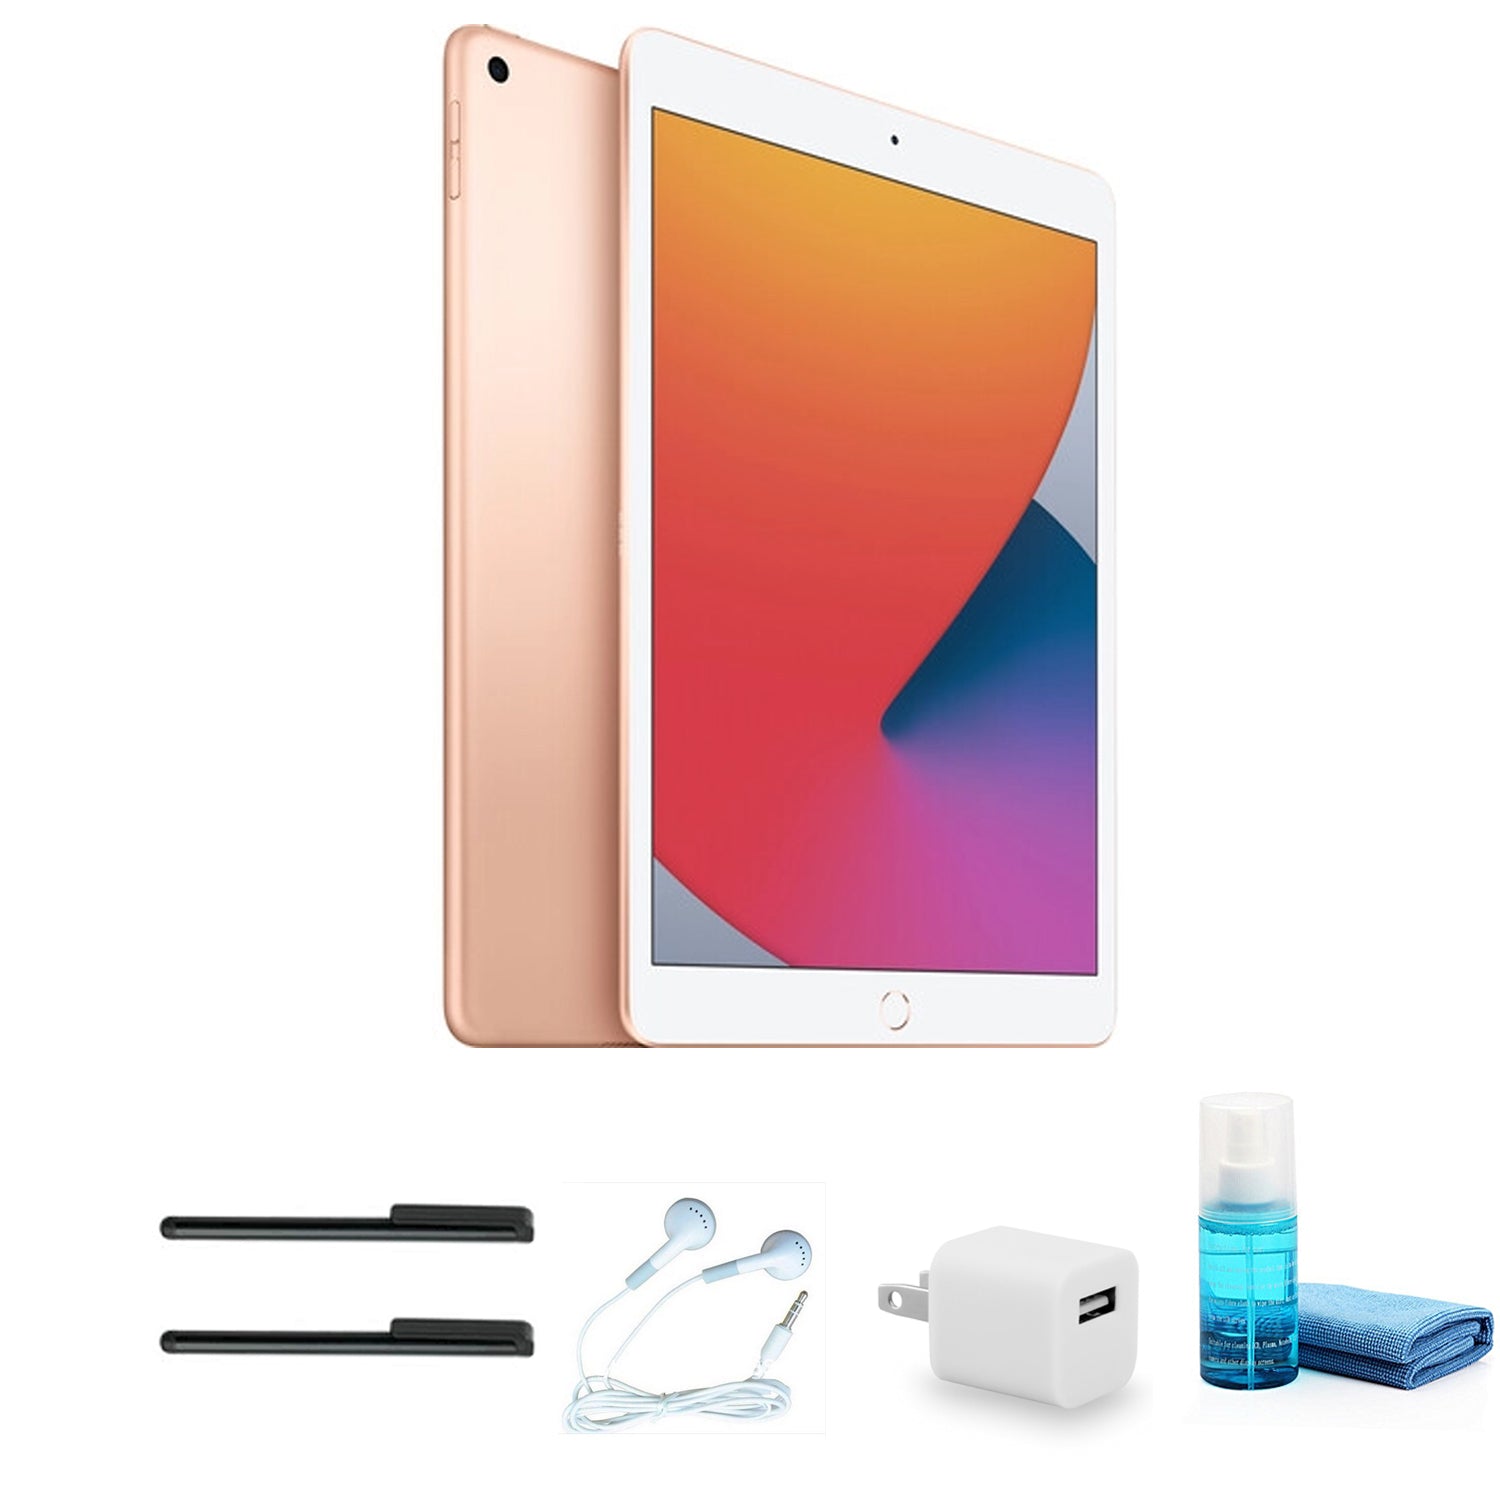 Apple 10.2 Inch iPad (32GB Wi-Fi Only Gold) with Wired Earbuds Bundle